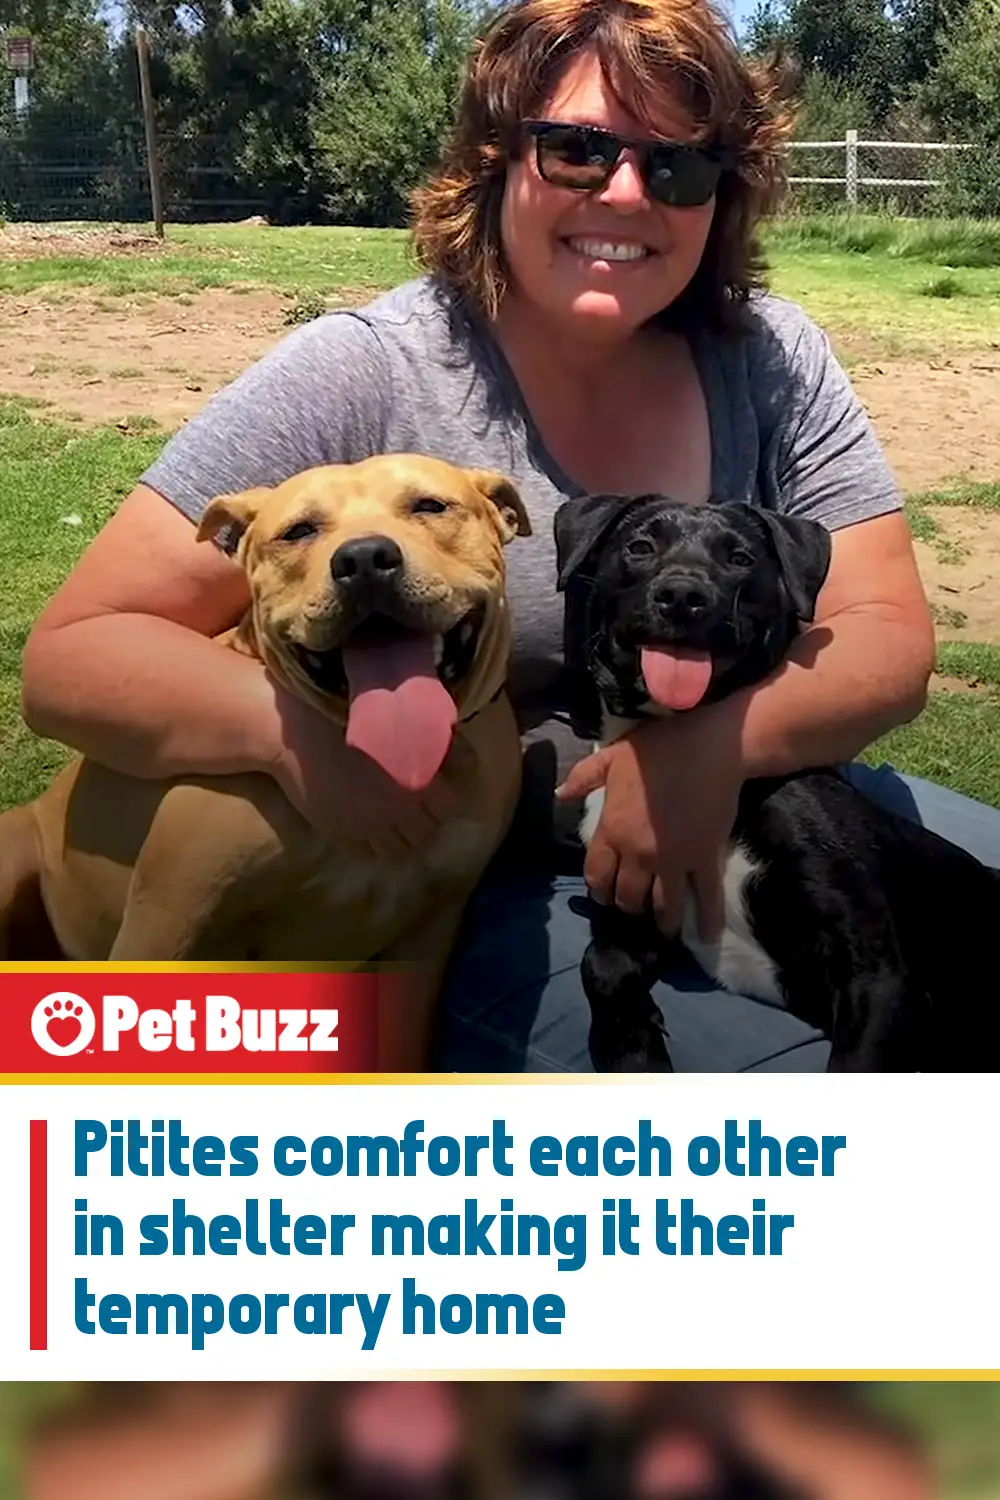 Pitites comfort each other in shelter making it their temporary home